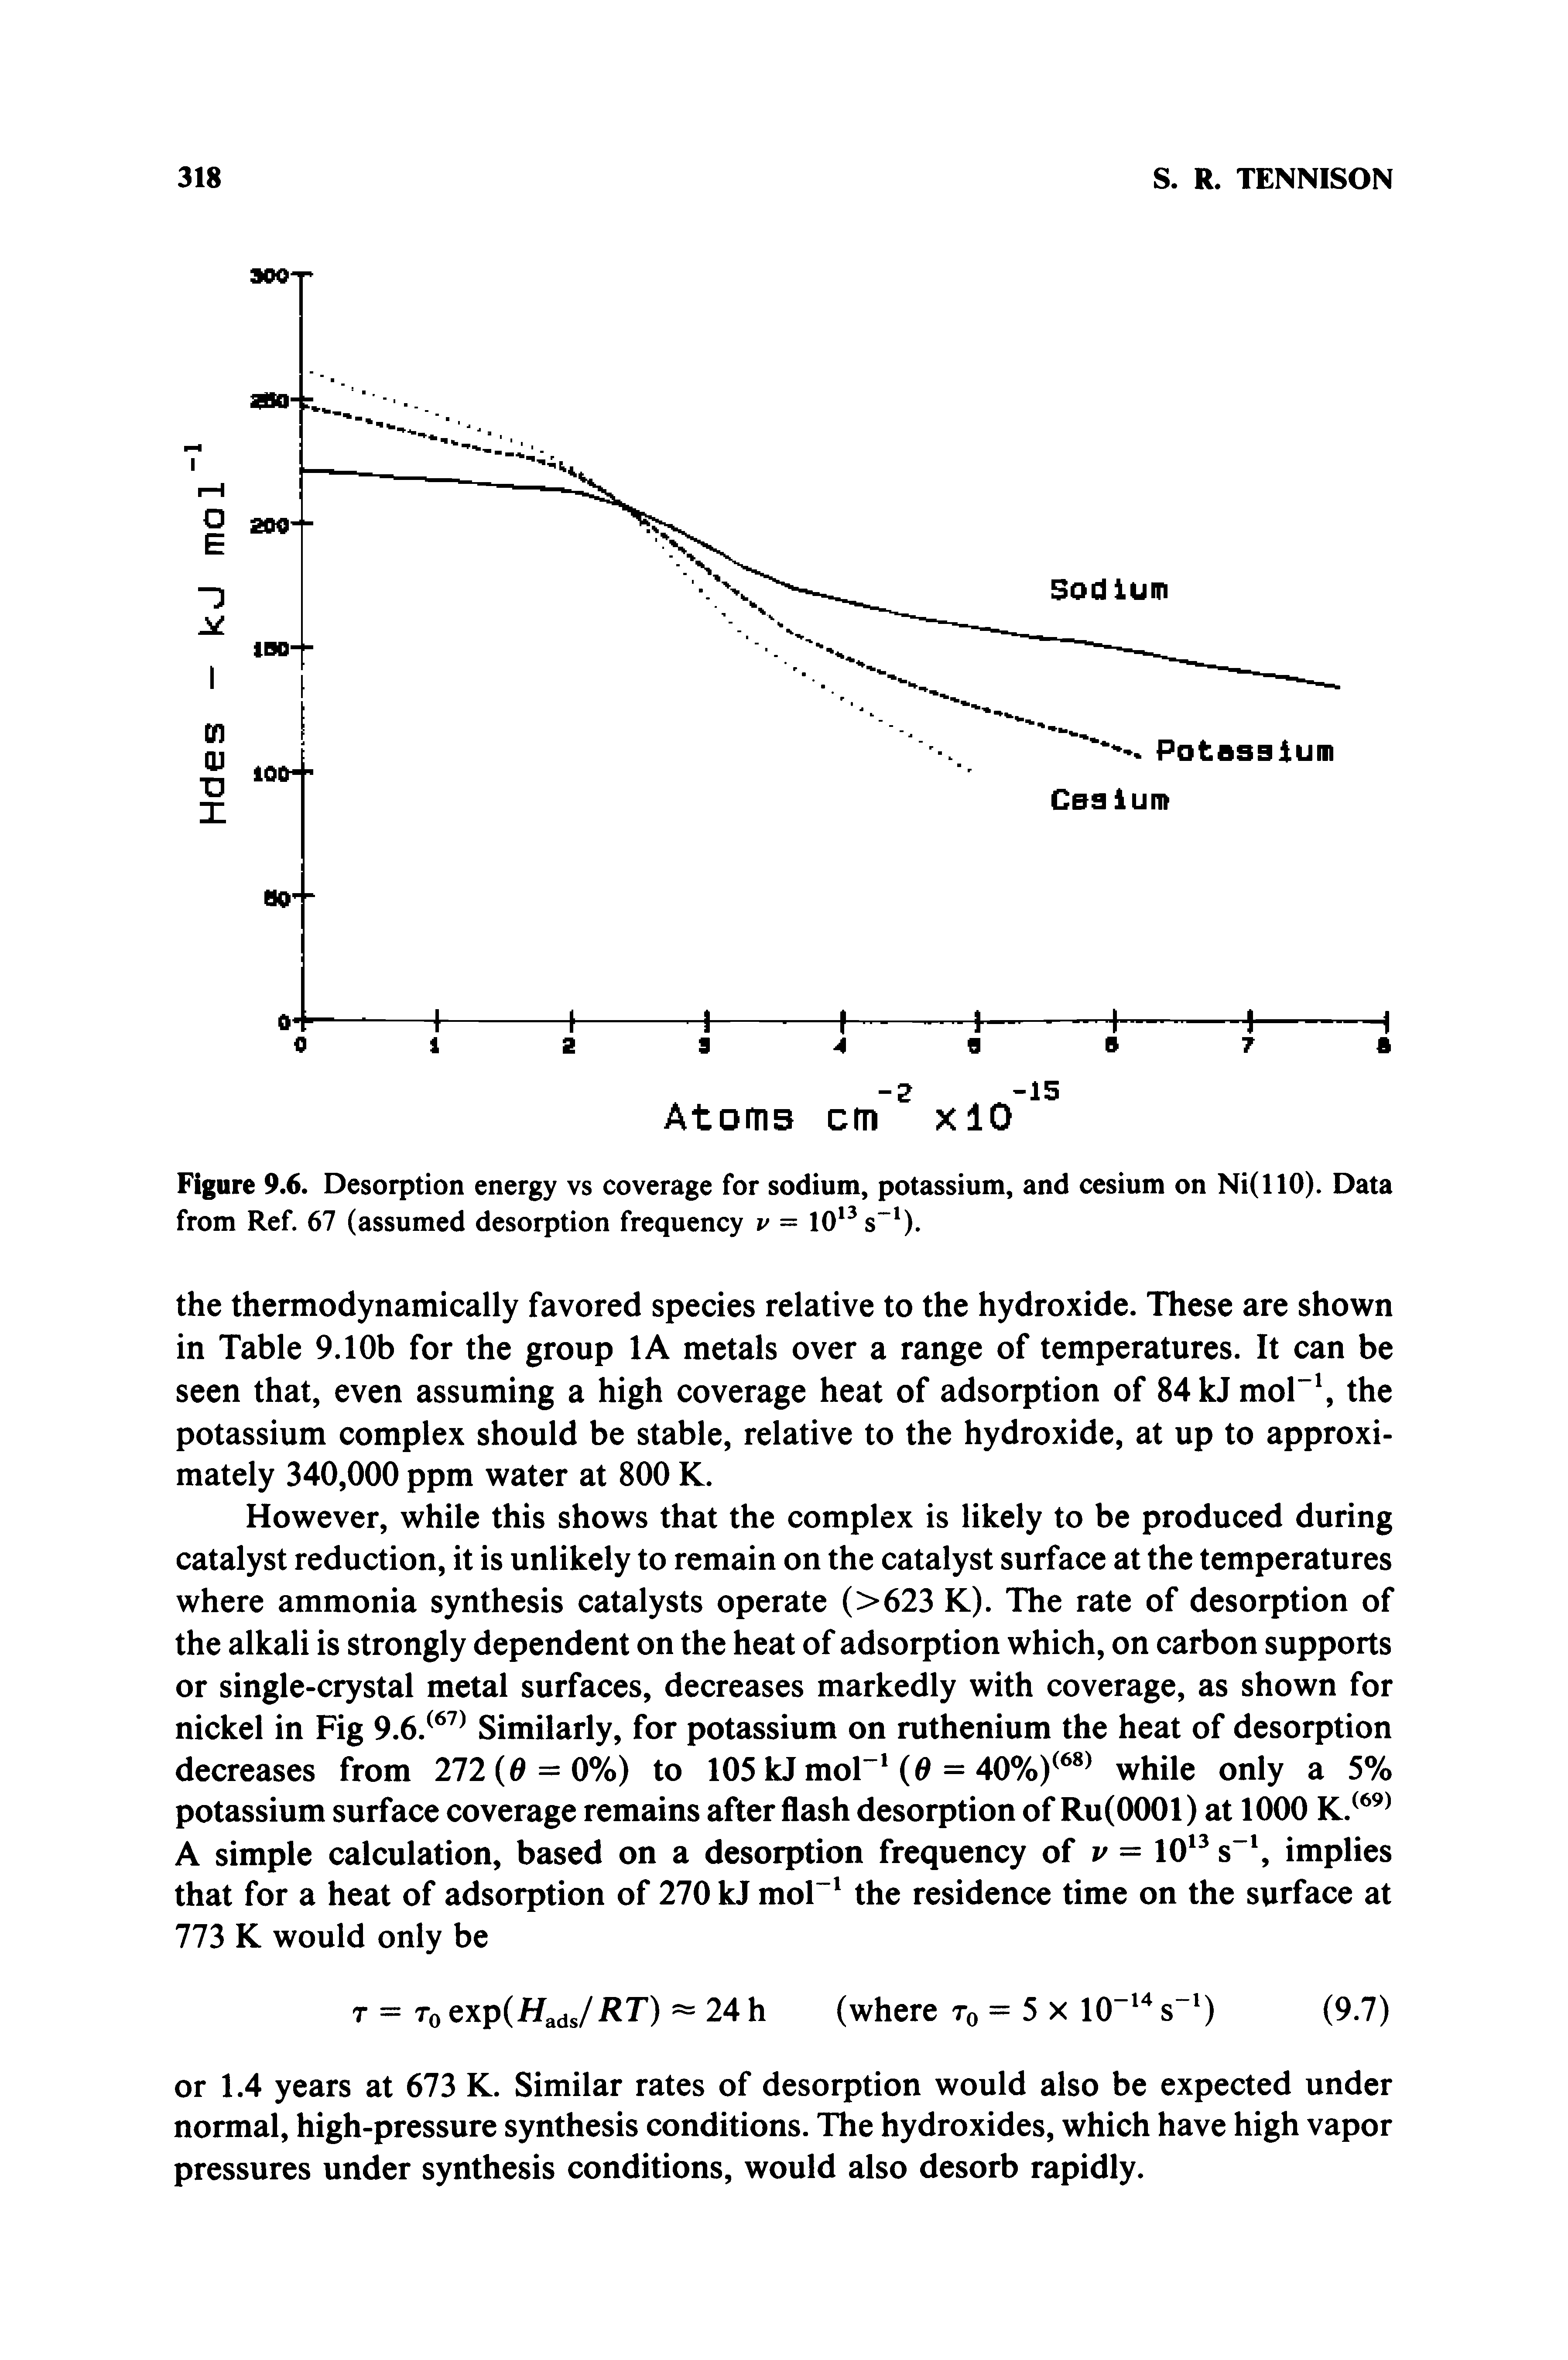 Figure 9.6. Desorption energy vs coverage for sodium, potassium, and cesium on Ni(llO). Data from Ref. 67 (assumed desorption frequency v = 10 s ).